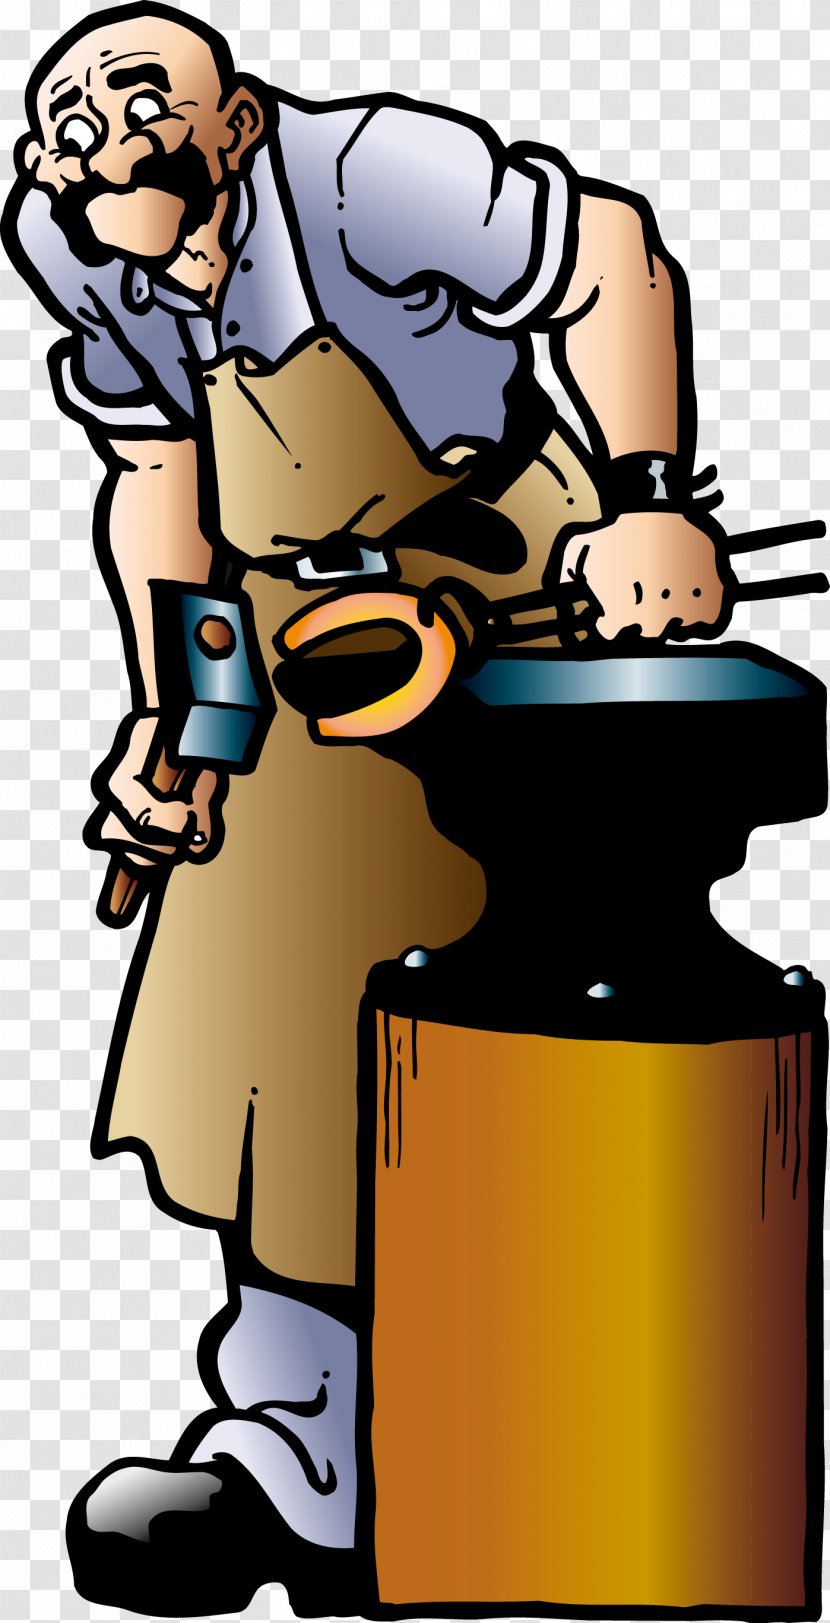 Blacksmith Child Anvil Architectural Engineering Profession - 45 Transparent PNG